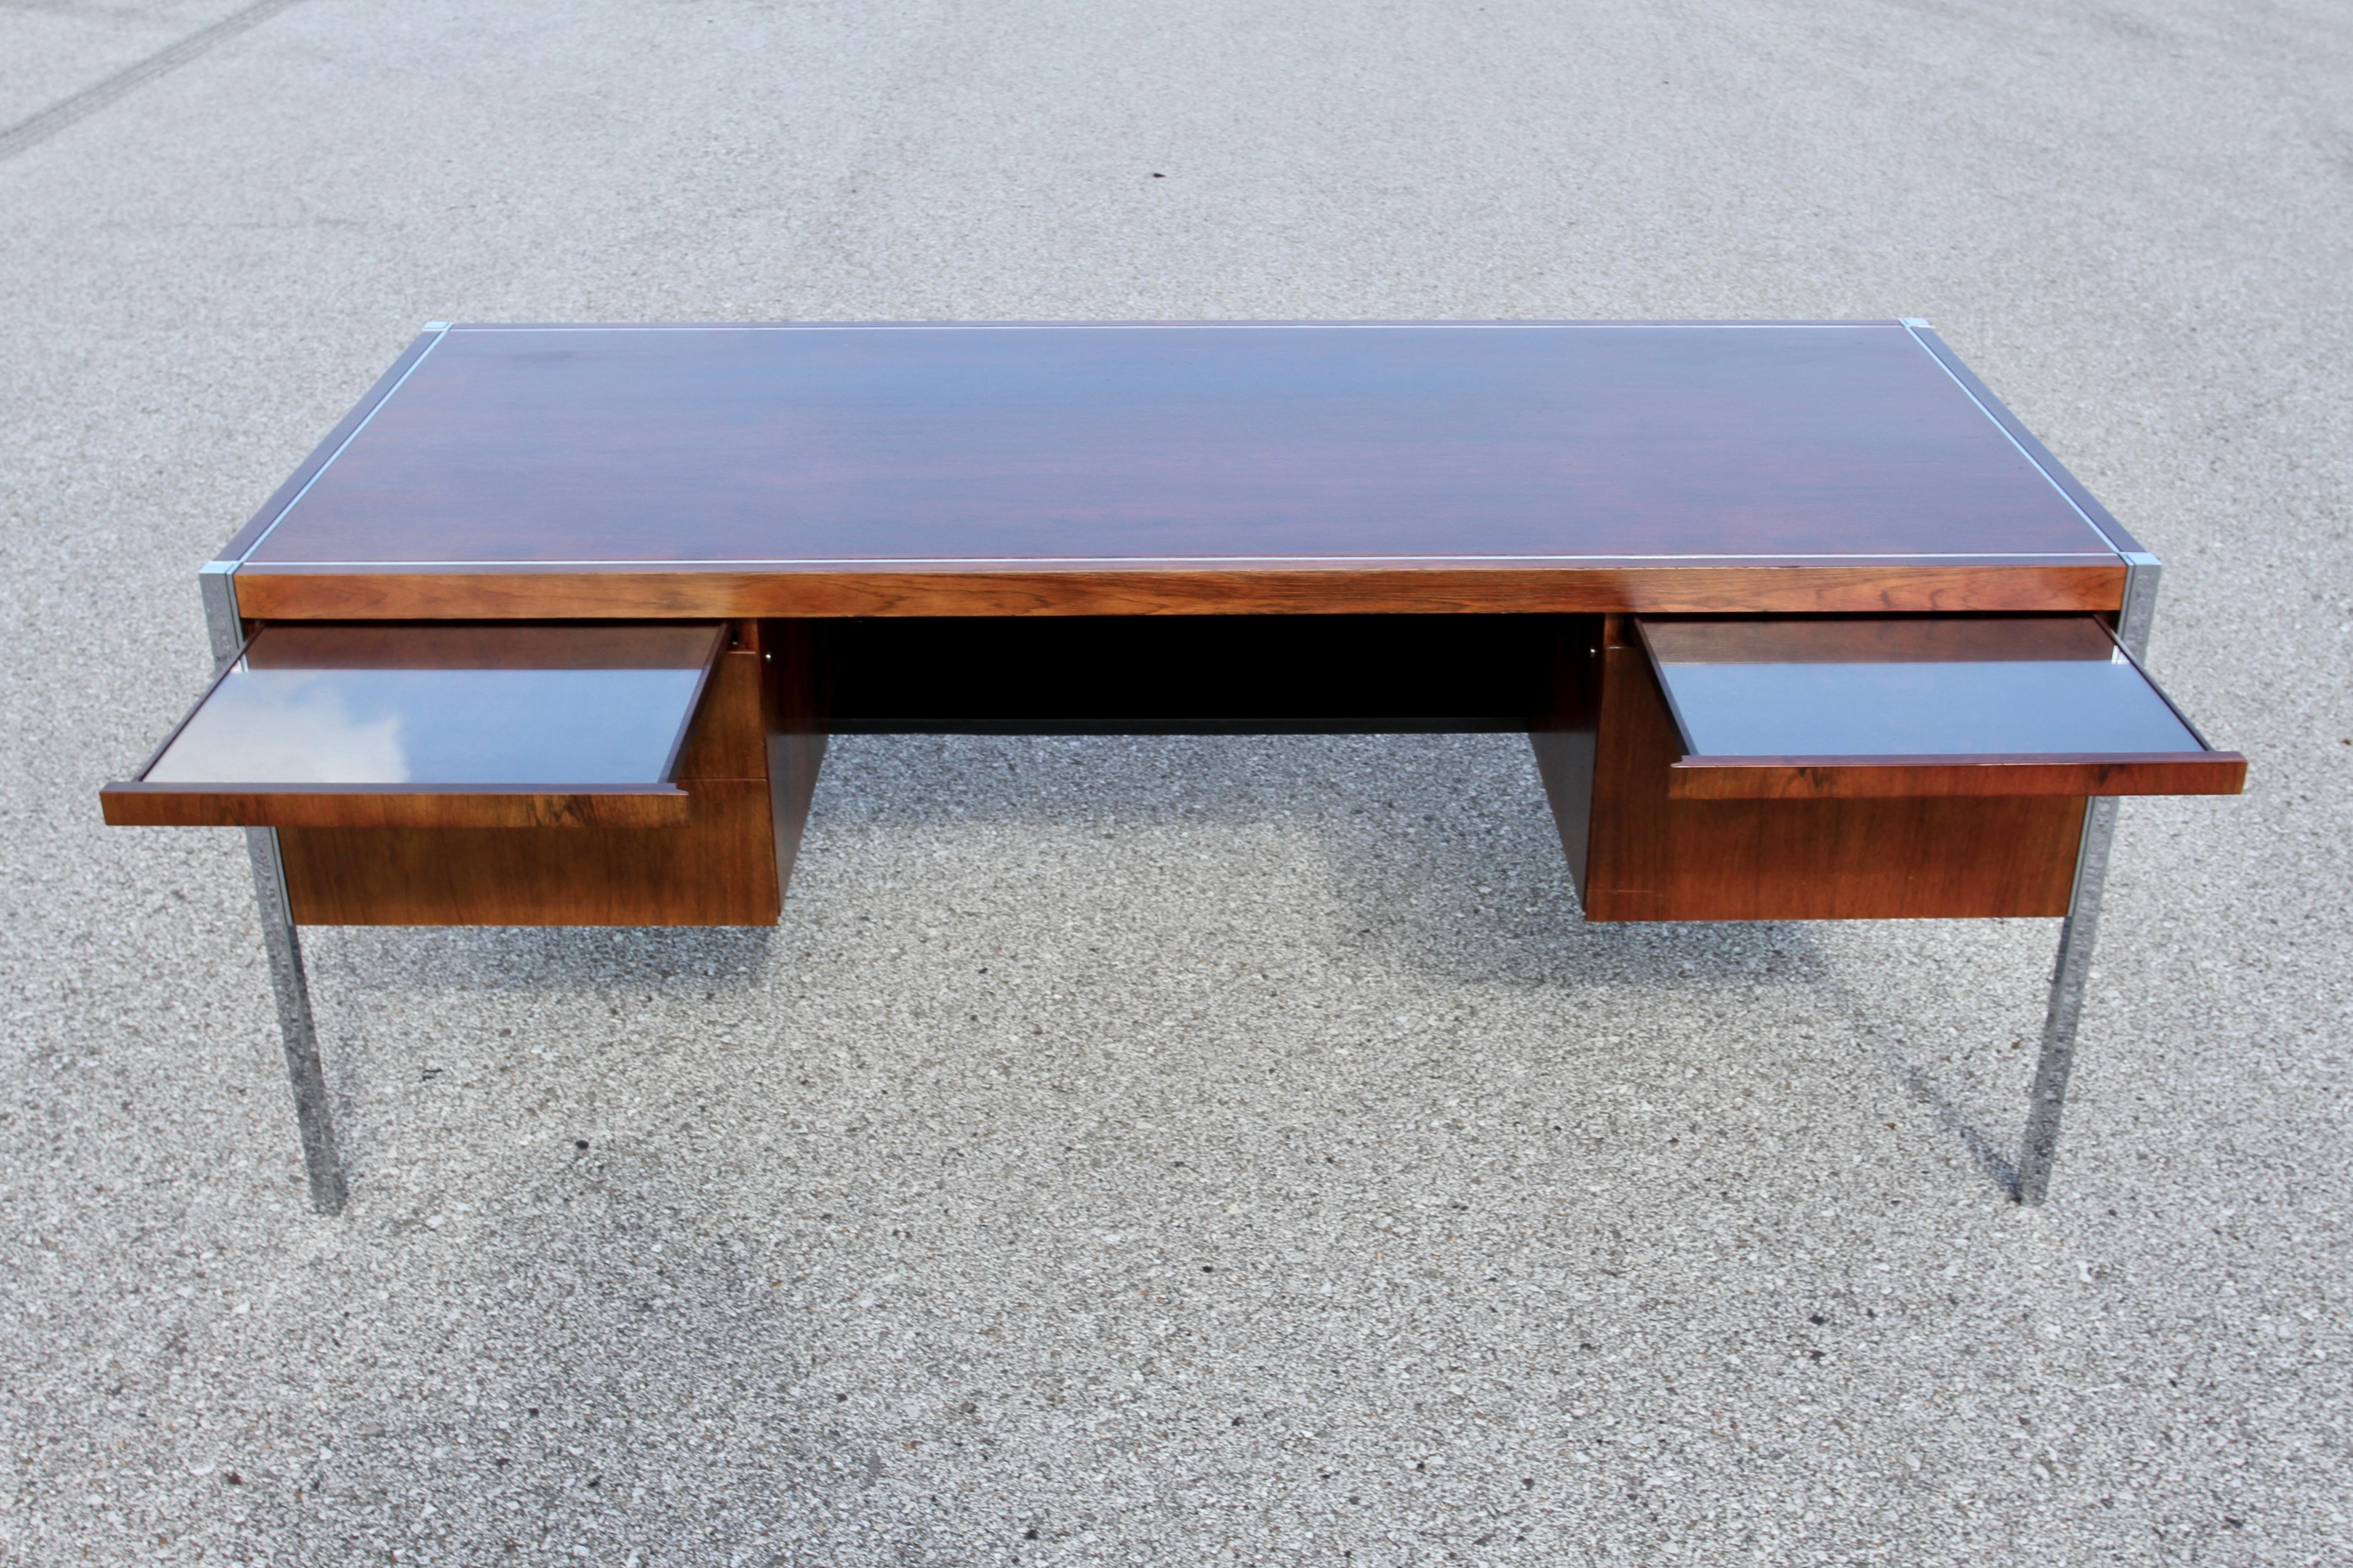 Richard Schultz for Knoll 1960s Mid-Century Modern Rosewood Executive Desk #4146 For Sale 12